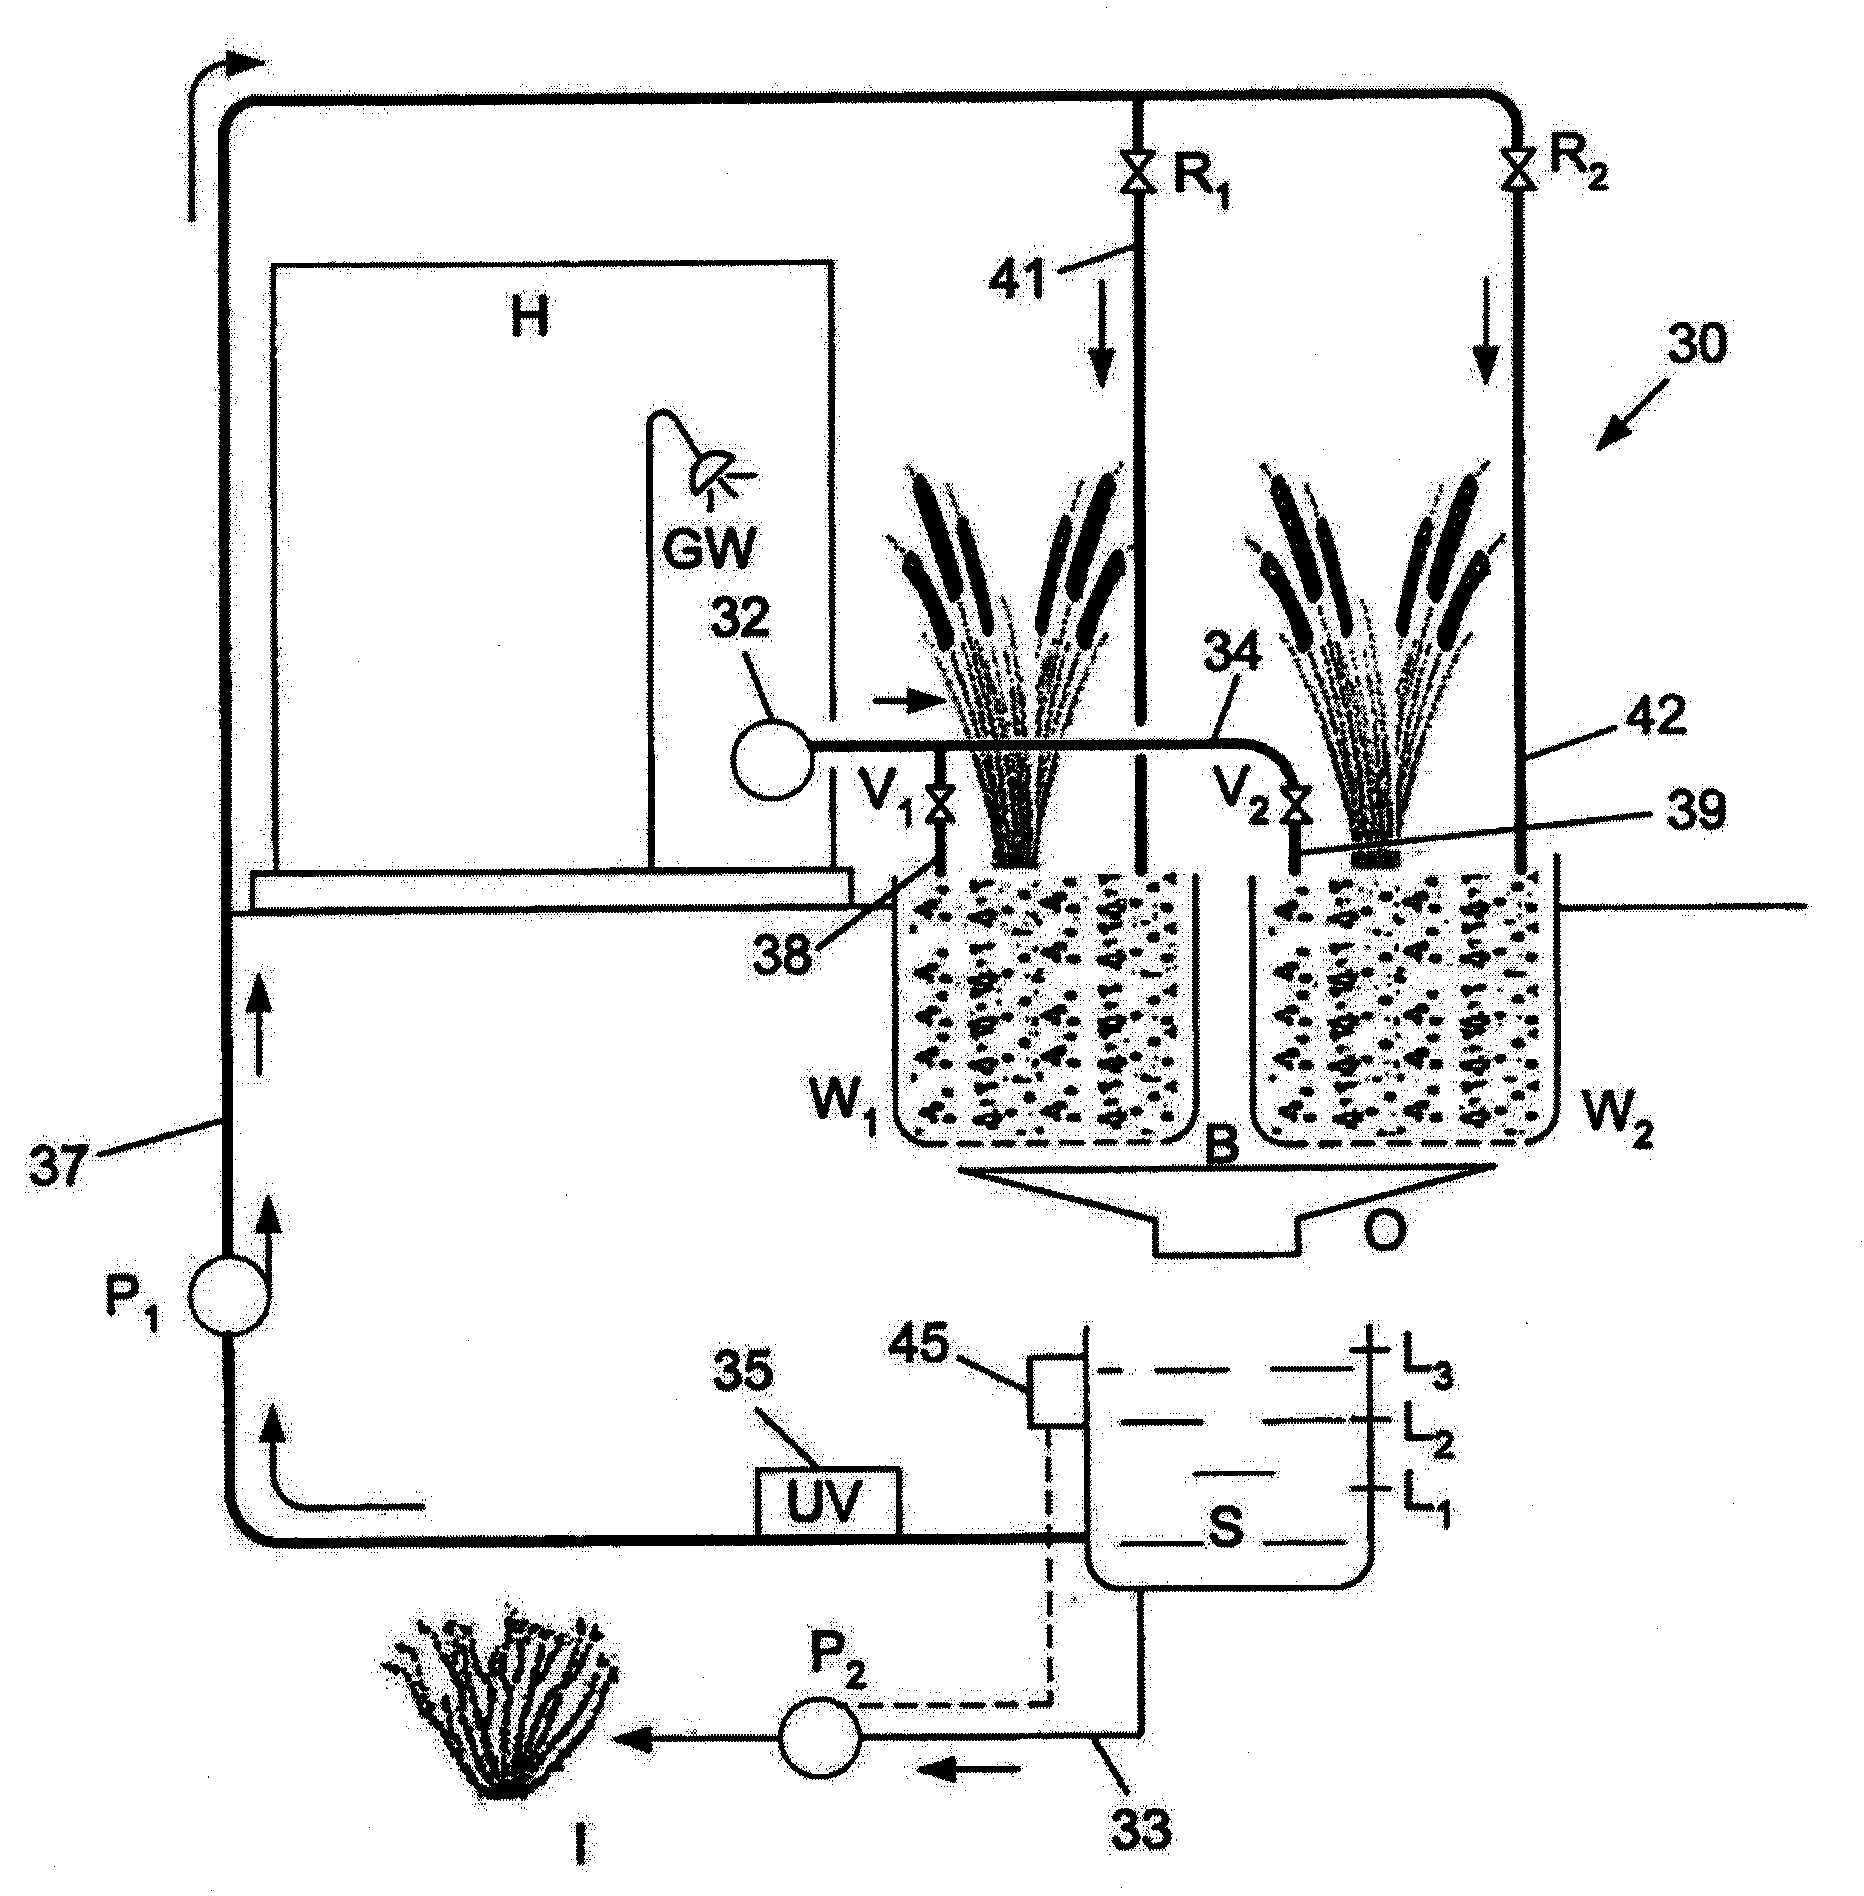 System and method for processing and reusing graywater including for use in home and garden